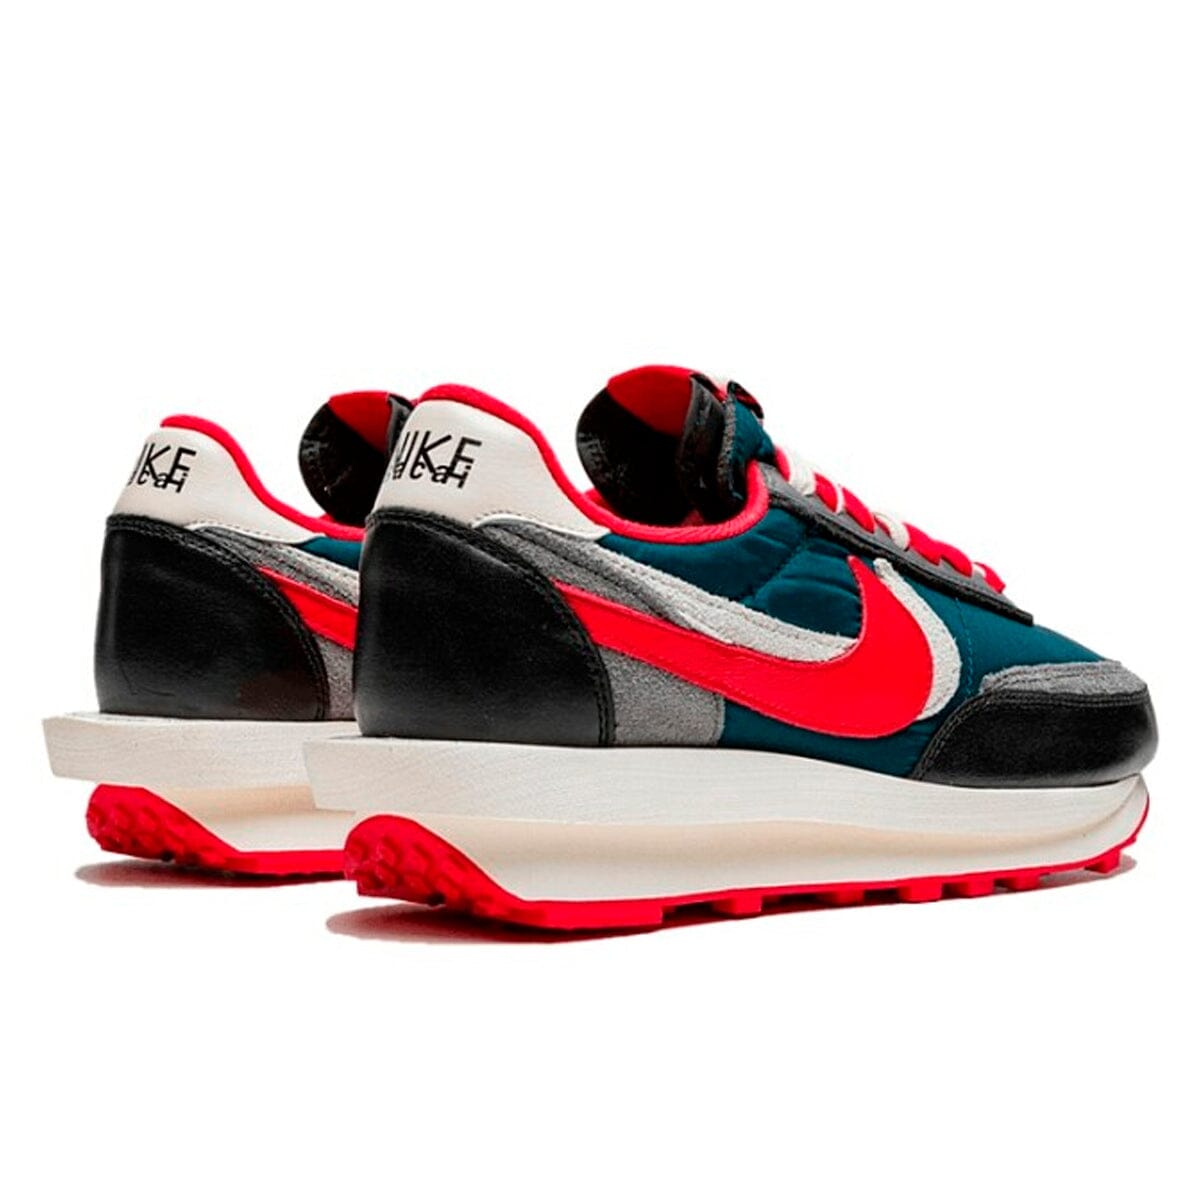 Nike LD Waffle Sacai Undercover Midnight Spruce University Red Sacai Blizz Sneakers 